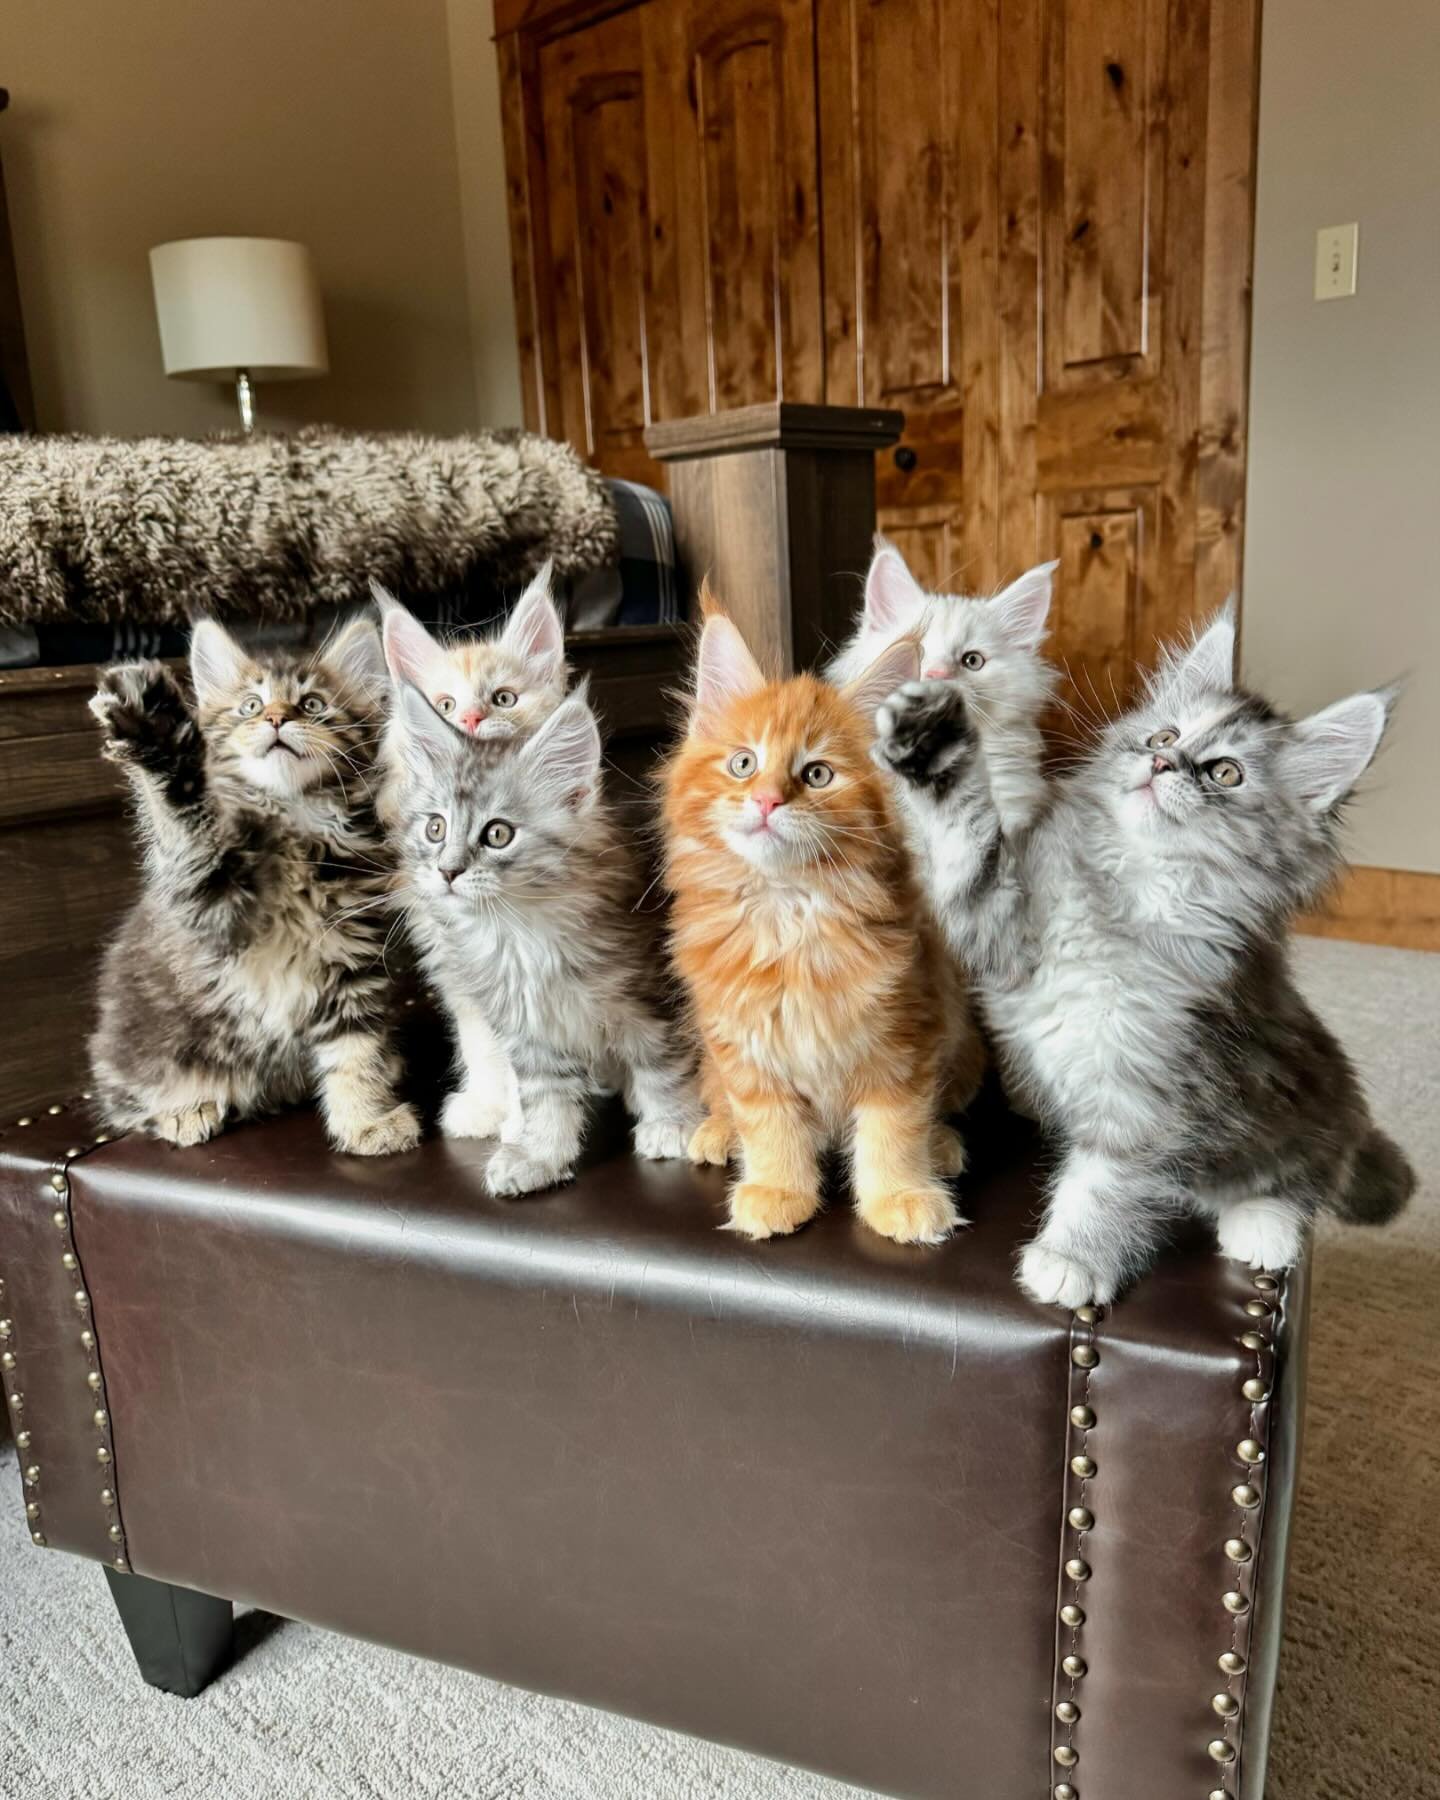 (Almost) NINE WEEKS! Holy cow time flies when we are having this much fun with our Great Norseman Litter. Just look at those little faces🫠🫠
&bull;
#mainecoon #mainecoons #mainecooncat #mainecoonlovers #bigcats #largecat #kitten #kittens #kittensofi